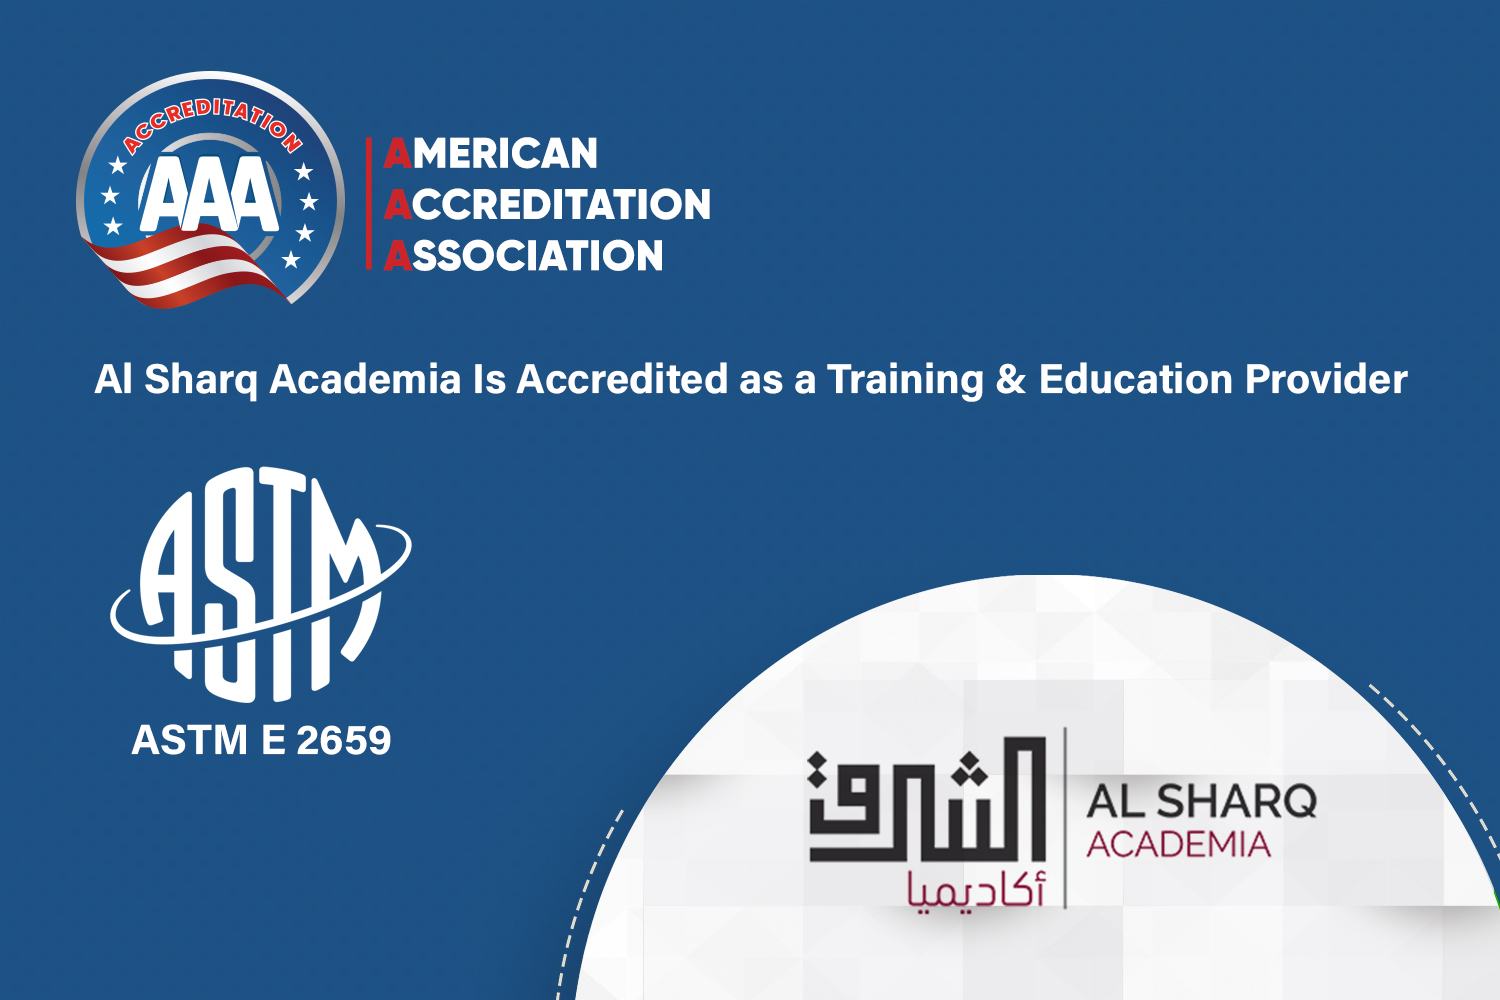 Al Sharq Academia Is Accredited as a Training & Education Provider